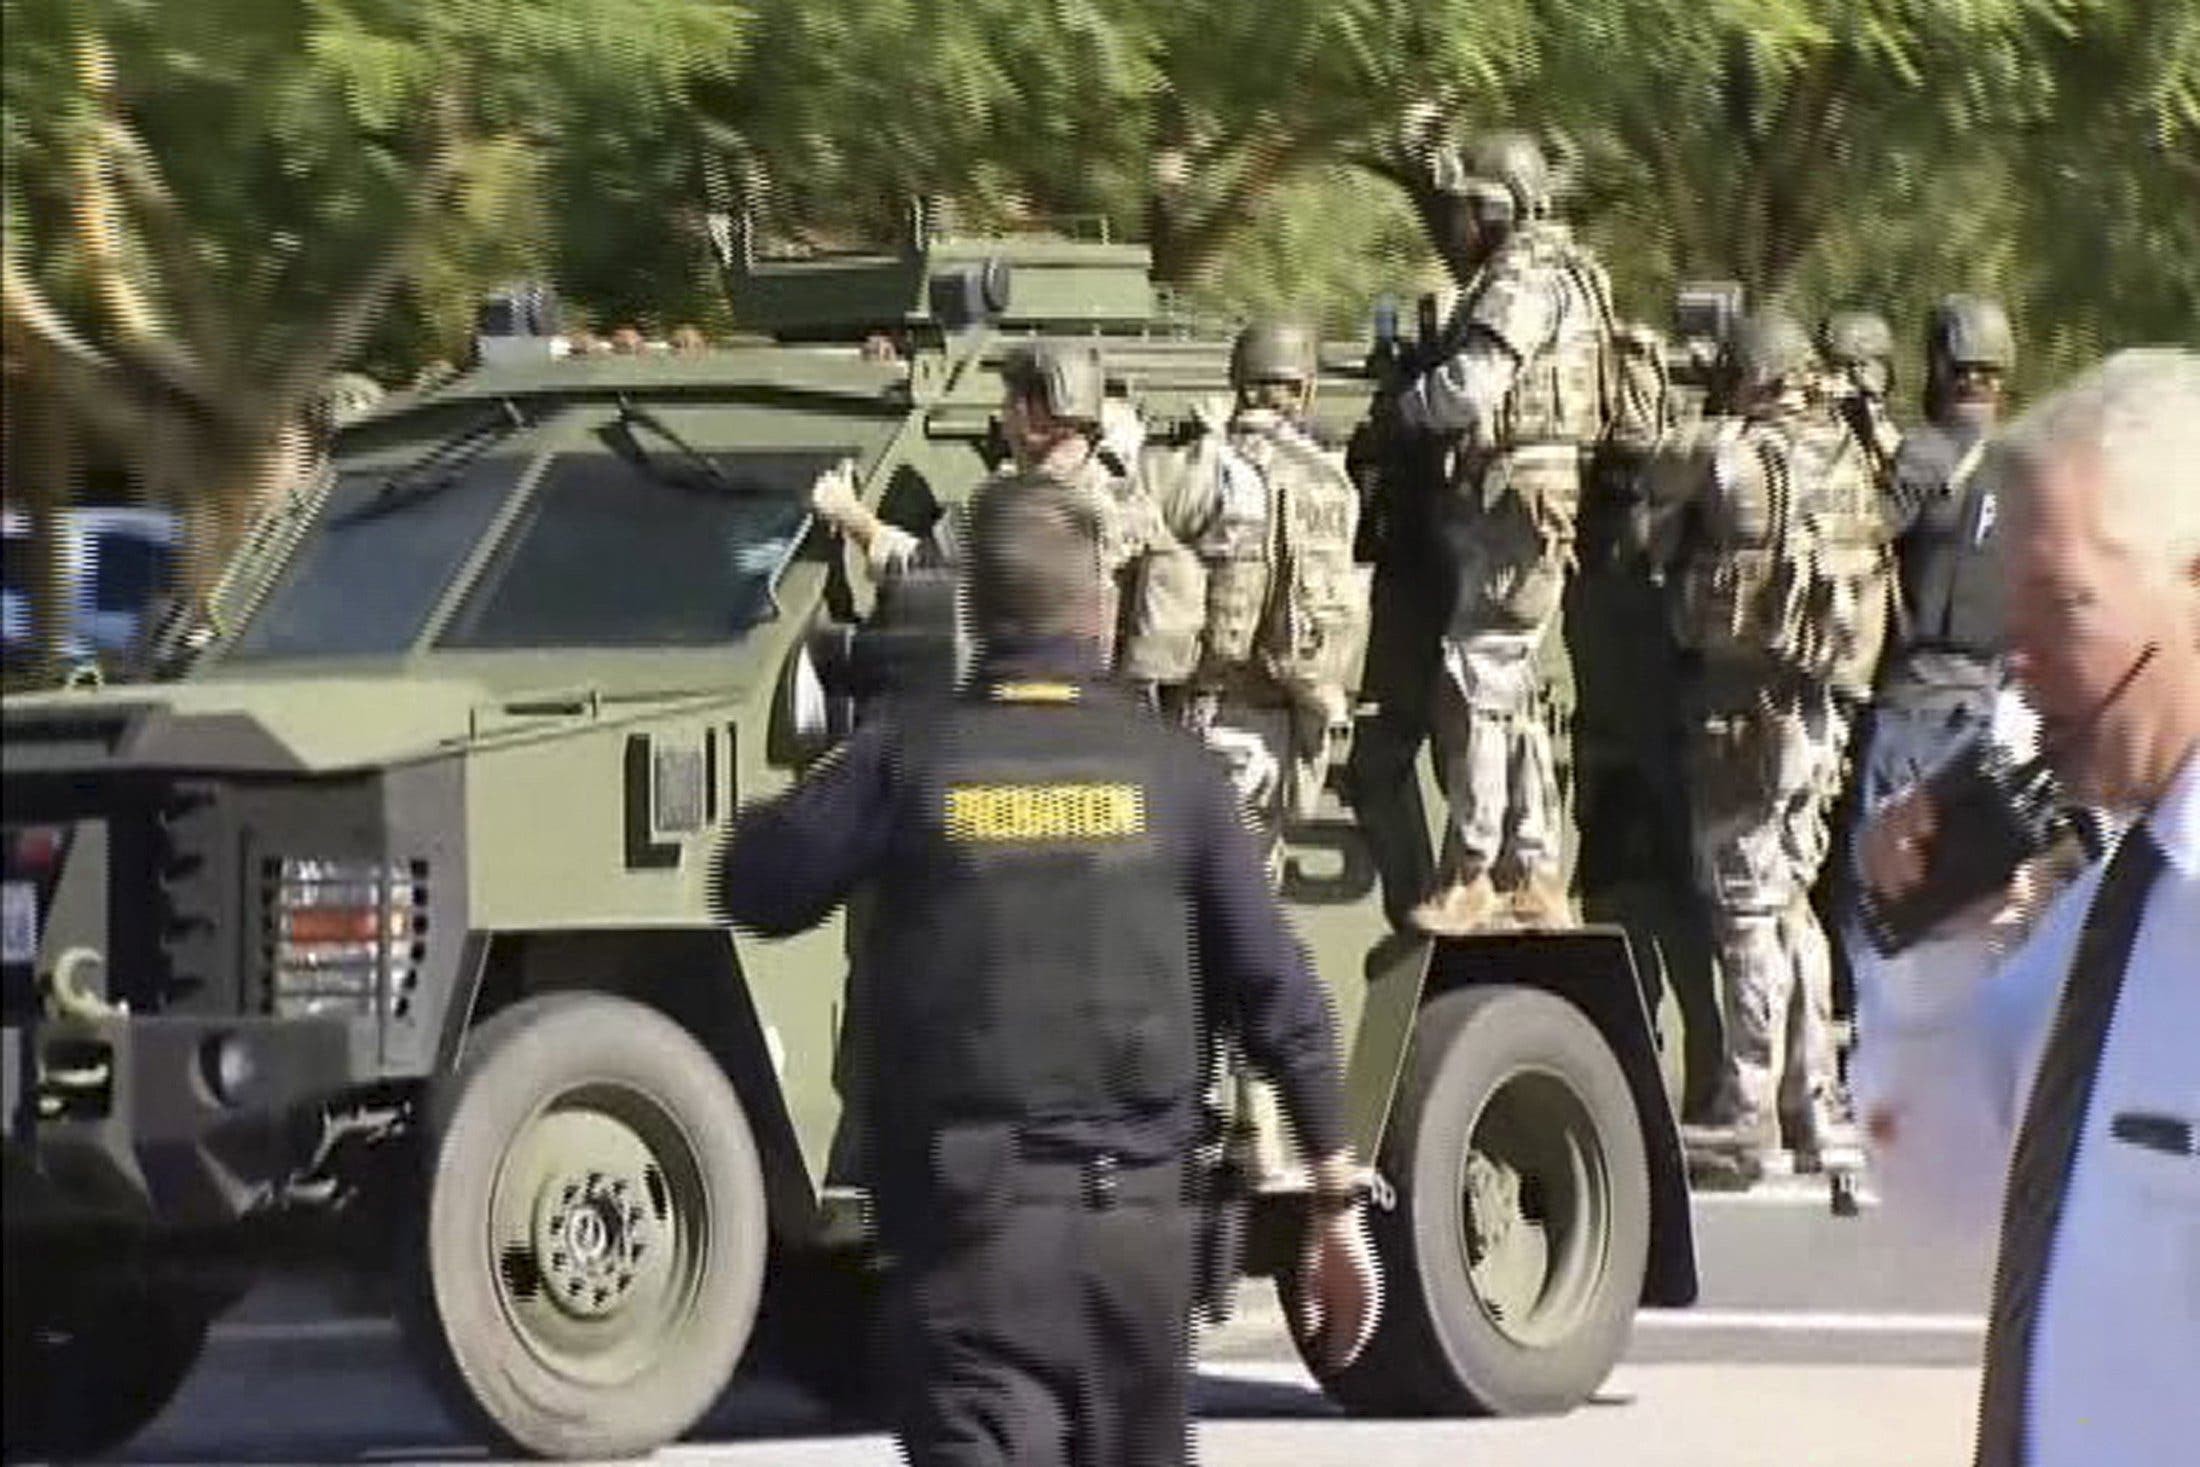 Police SWAT team members ride on a armored vehicle outside the Inland Regional Center in San Bernardino, California in this still image taken from video December 2, 2015. At least 20 people were reported injured in an active shooter situation, according to news reports. REUTERS/NBCLA.com/Handout via Reuters NO SALES. FOR EDITORIAL USE ONLY. NOT FOR SALE FOR MARKETING OR ADVERTISING CAMPAIGNS. THIS IMAGE HAS BEEN SUPPLIED BY A THIRD PARTY. IT IS DISTRIBUTED, EXACTLY AS RECEIVED BY REUTERS, AS A SERVICE TO CLIENTS NO RESALES. NO ARCHIVE TPX IMAGES OF THE DAY